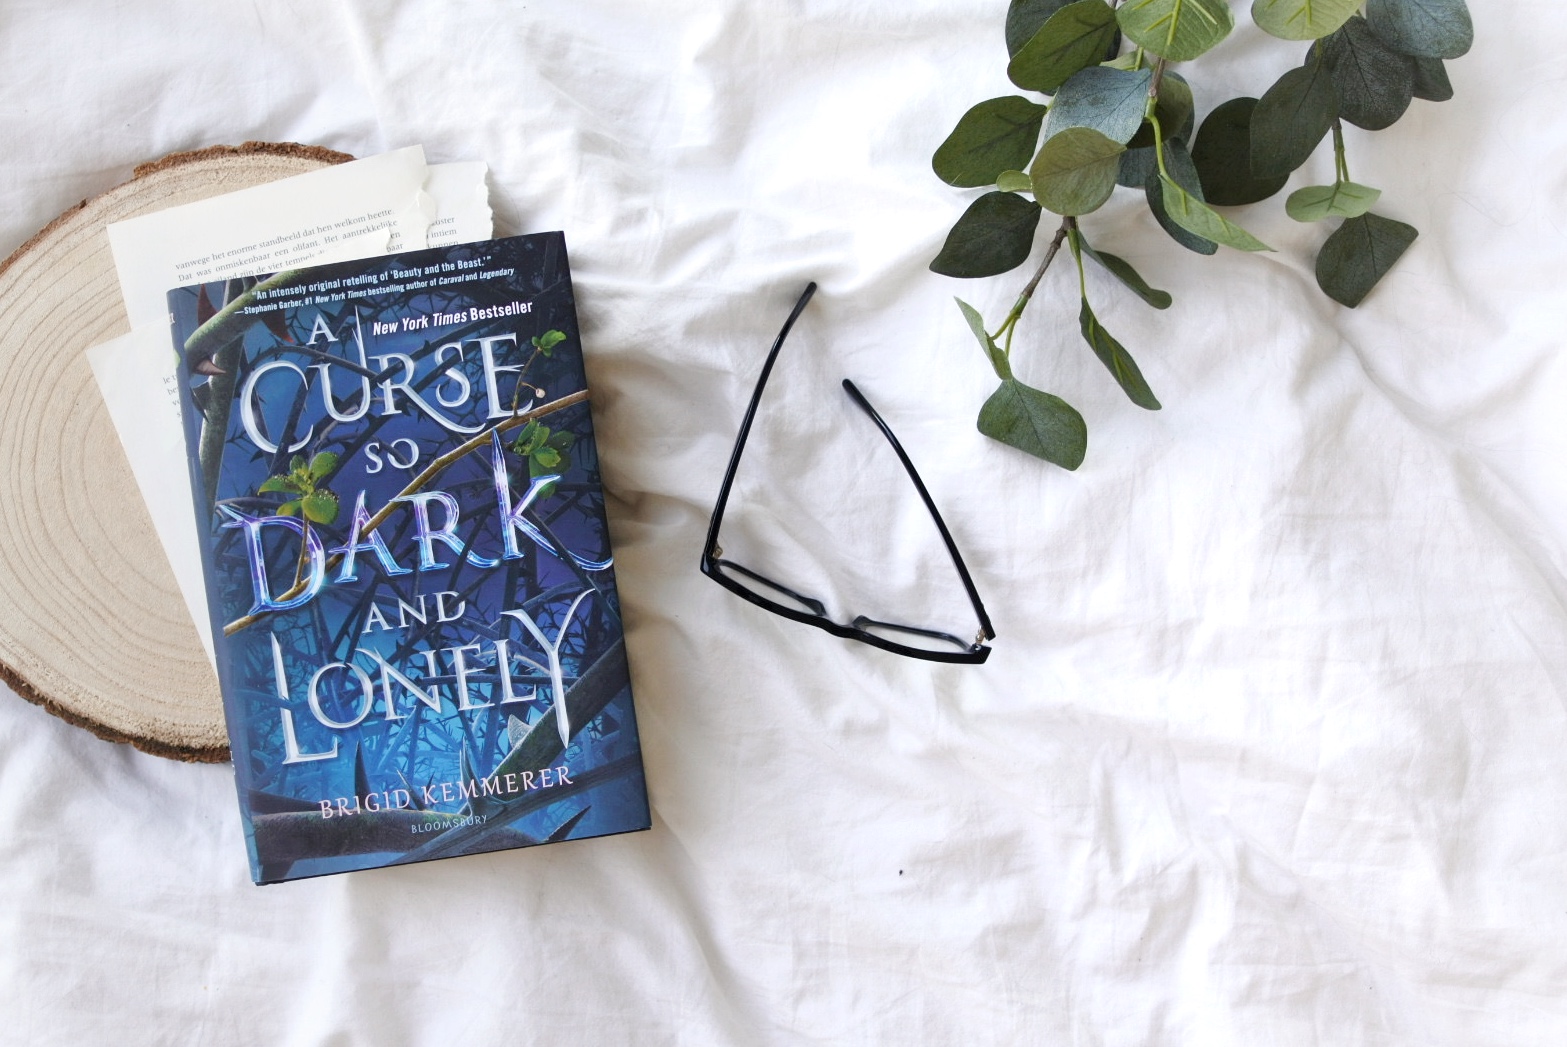 a curse so dark and lonely book review